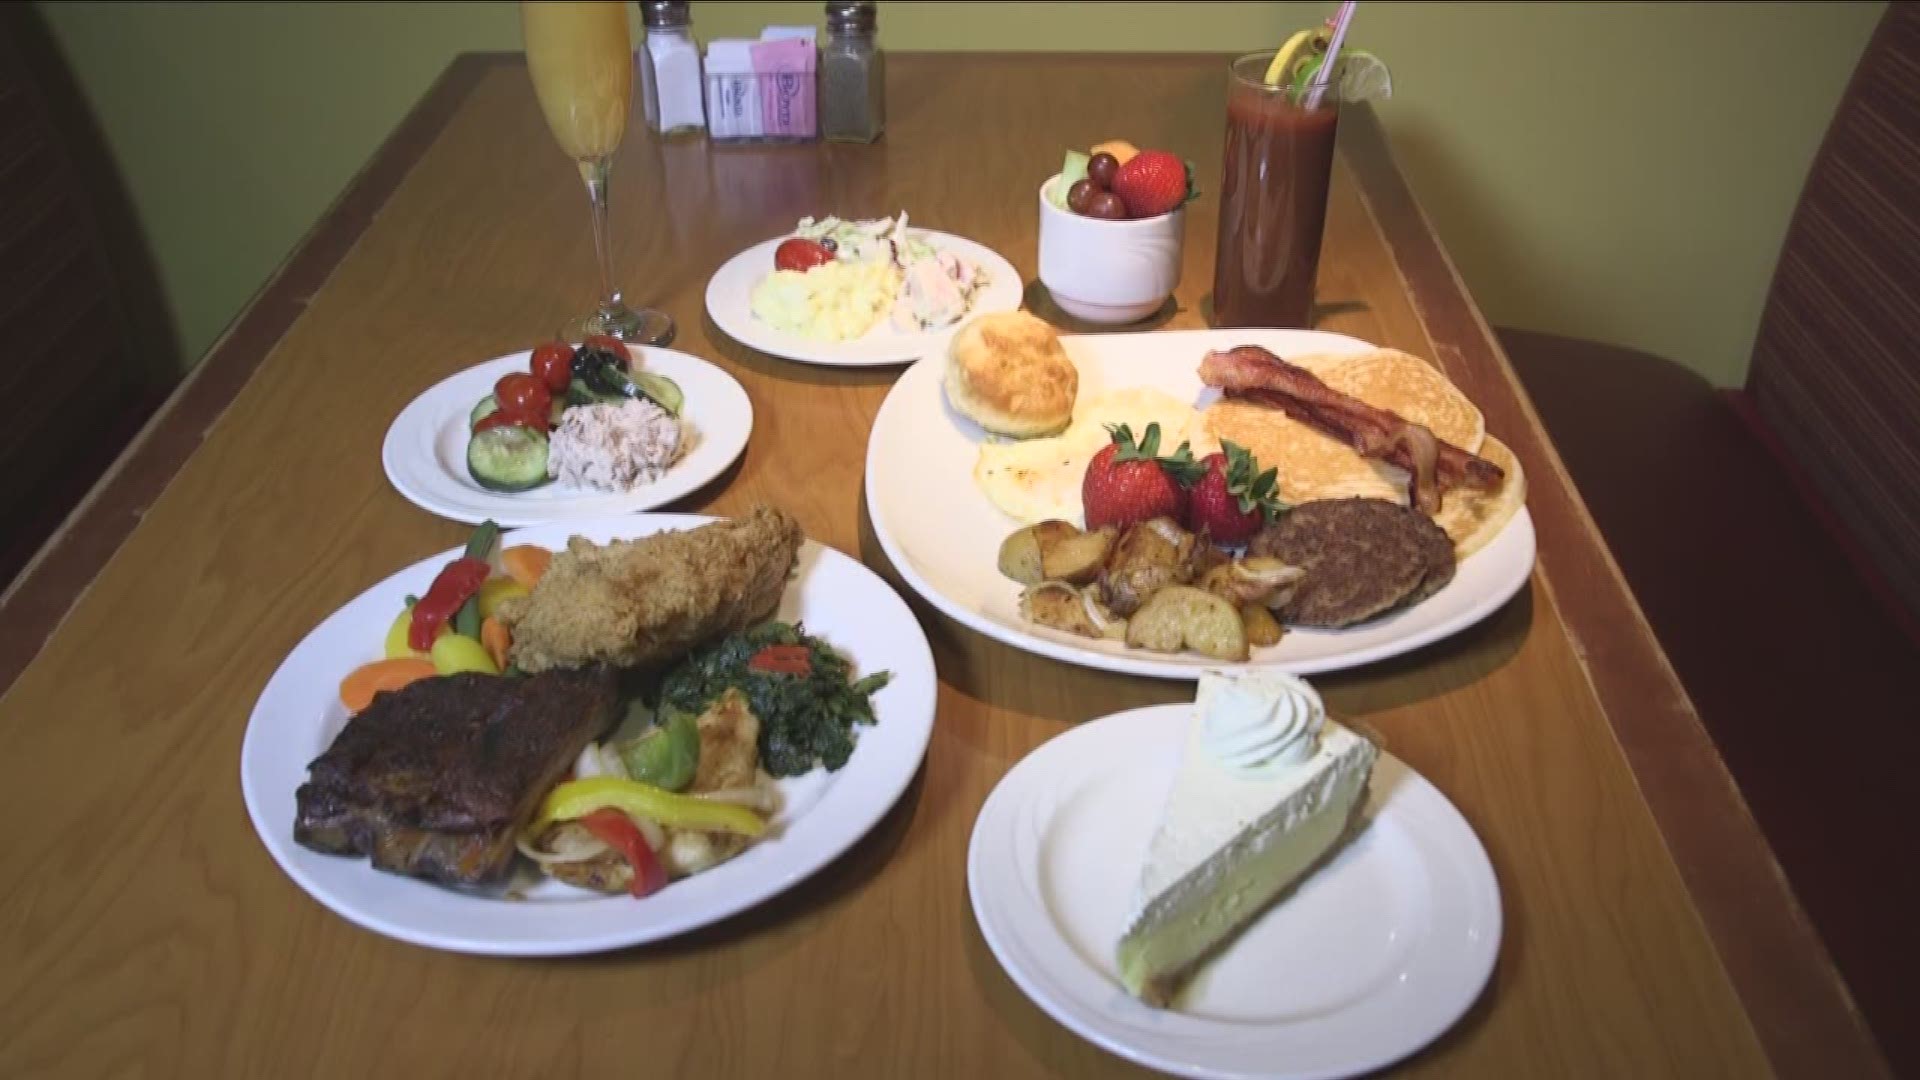 Triple Crown Buffet dishes up some great food perfect for brunch, only at Delta Downs!